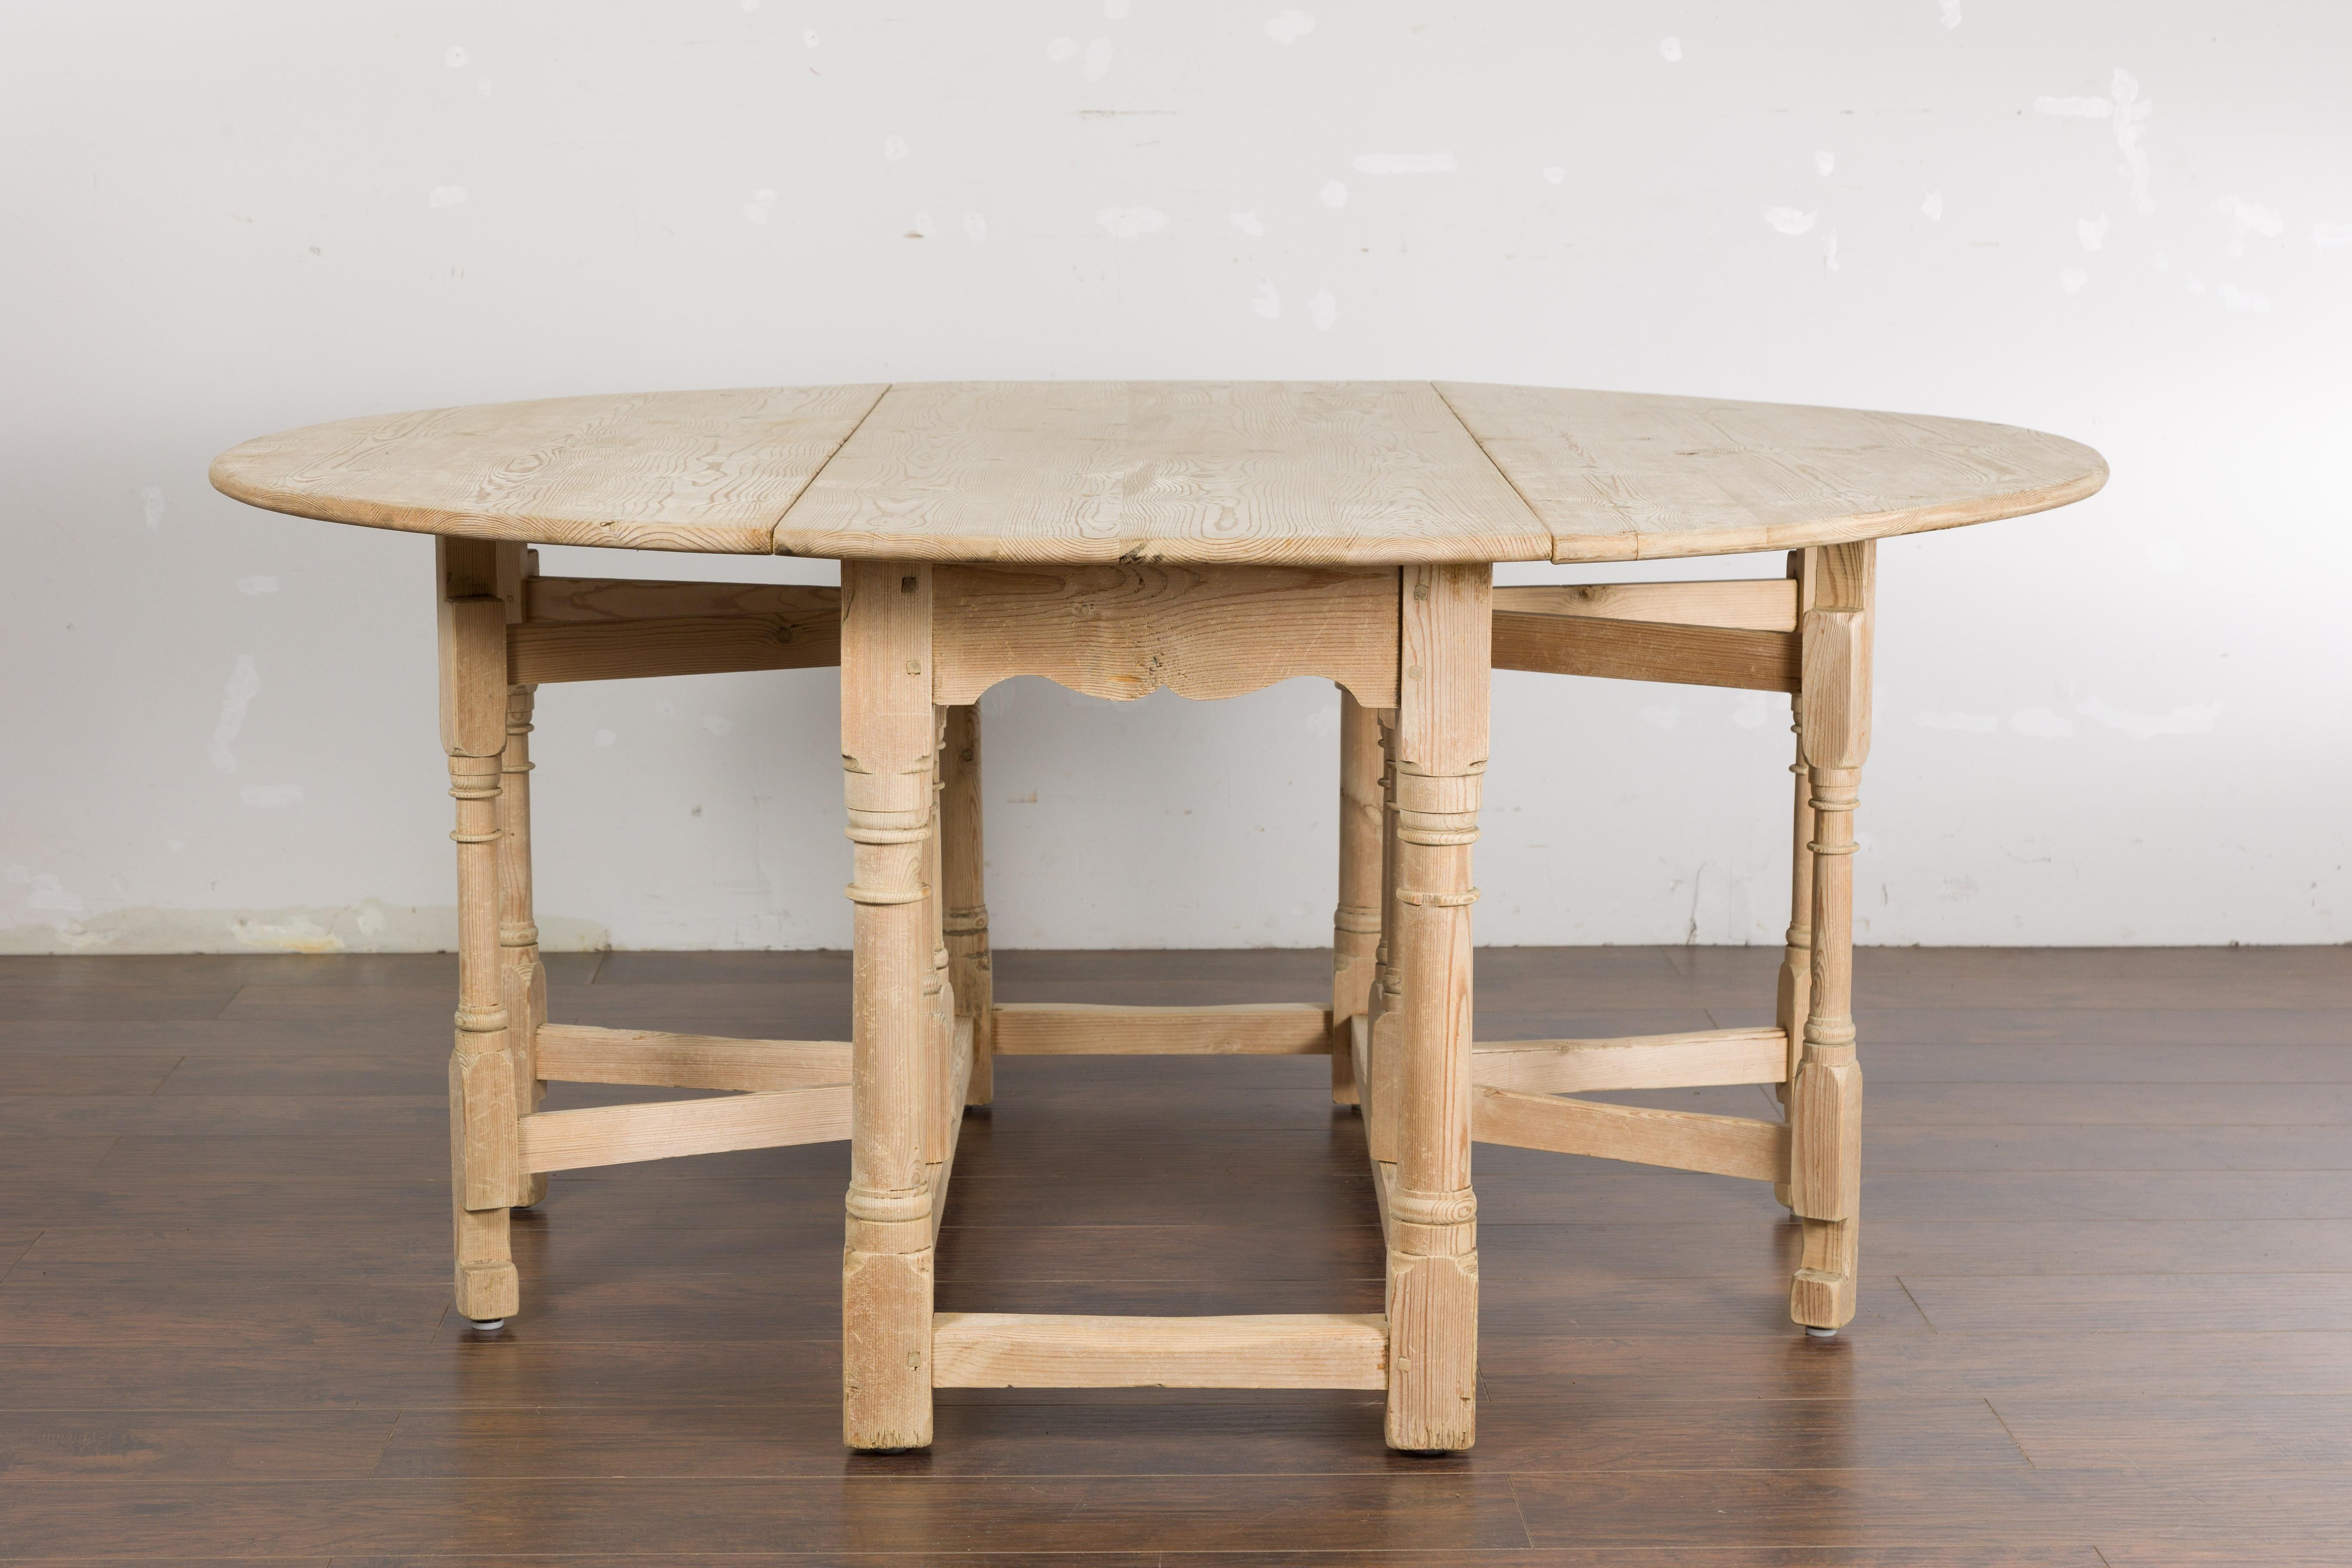 Rustic English 19th Century Pine Drop Leaf Round Top Table with Turned Legs For Sale 10